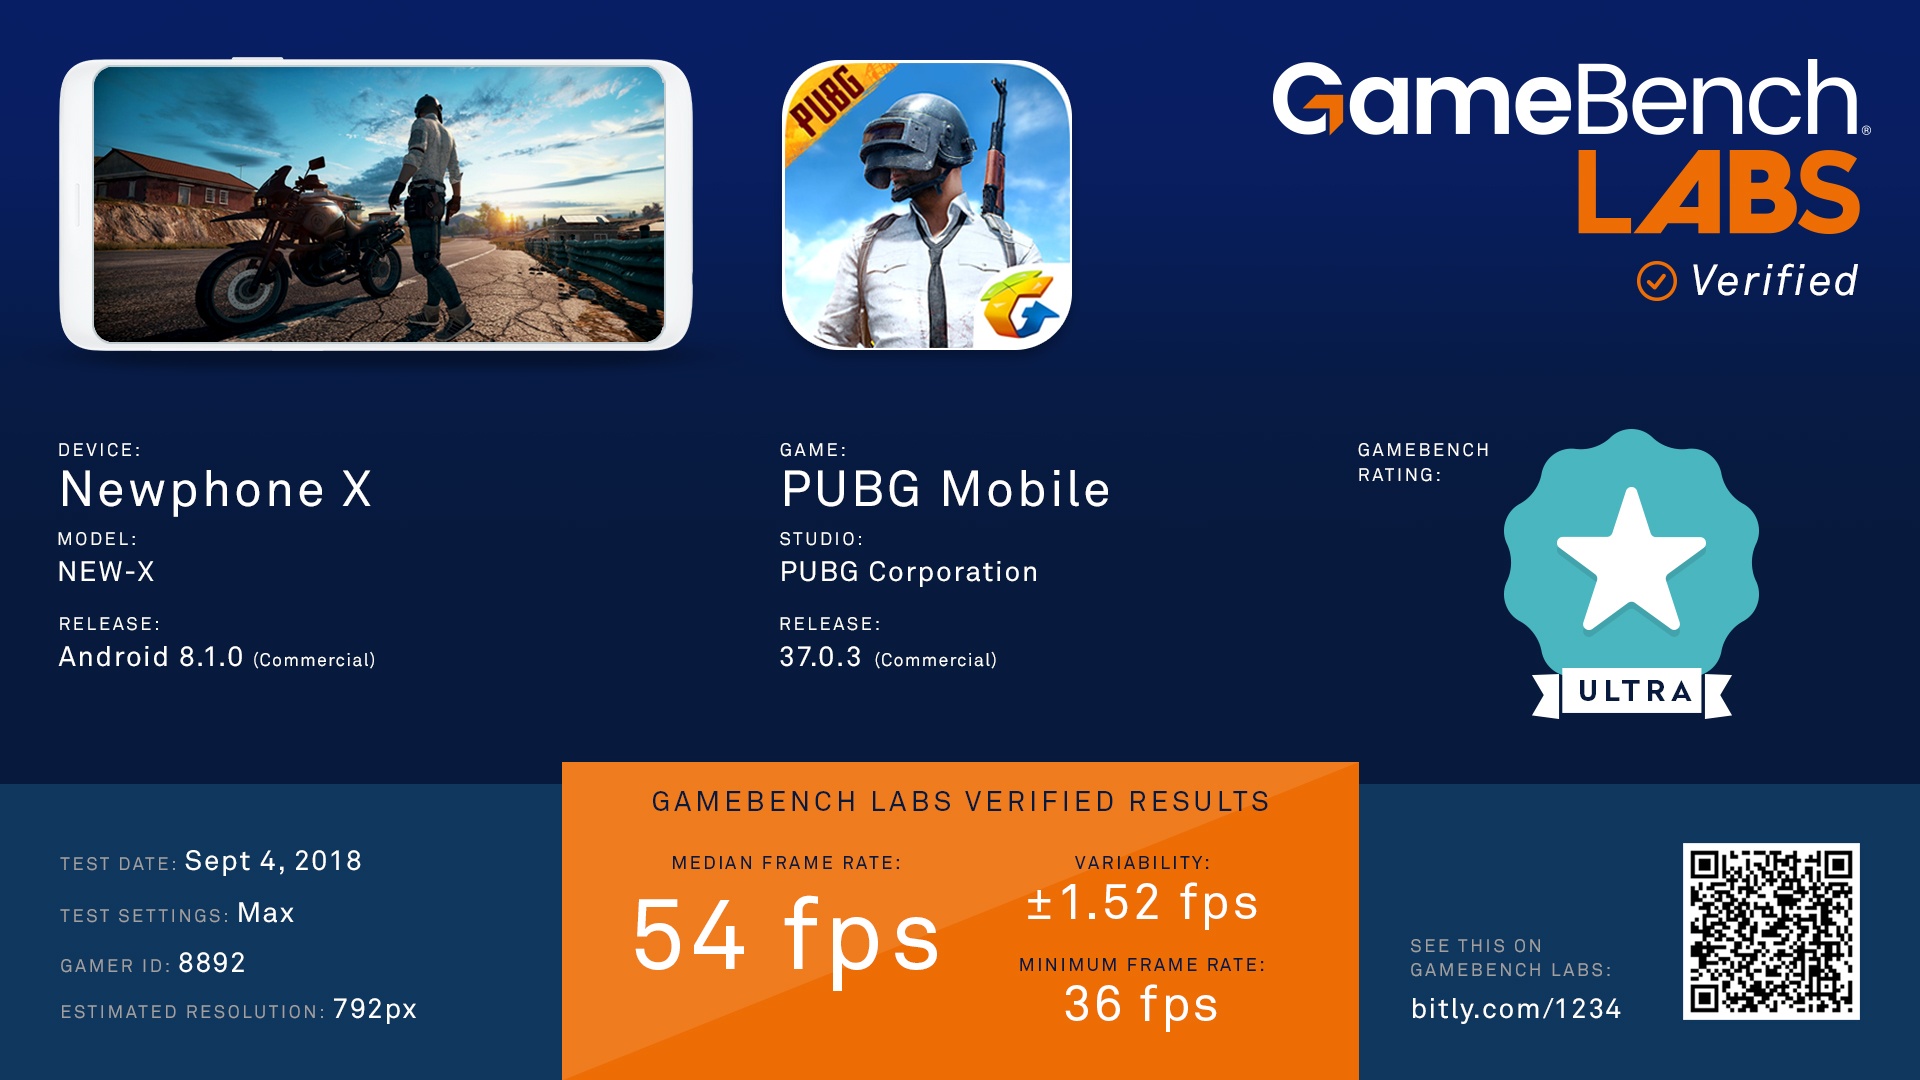 Introducing GameBench Labs: Providing verified performance results to device makers and game studios